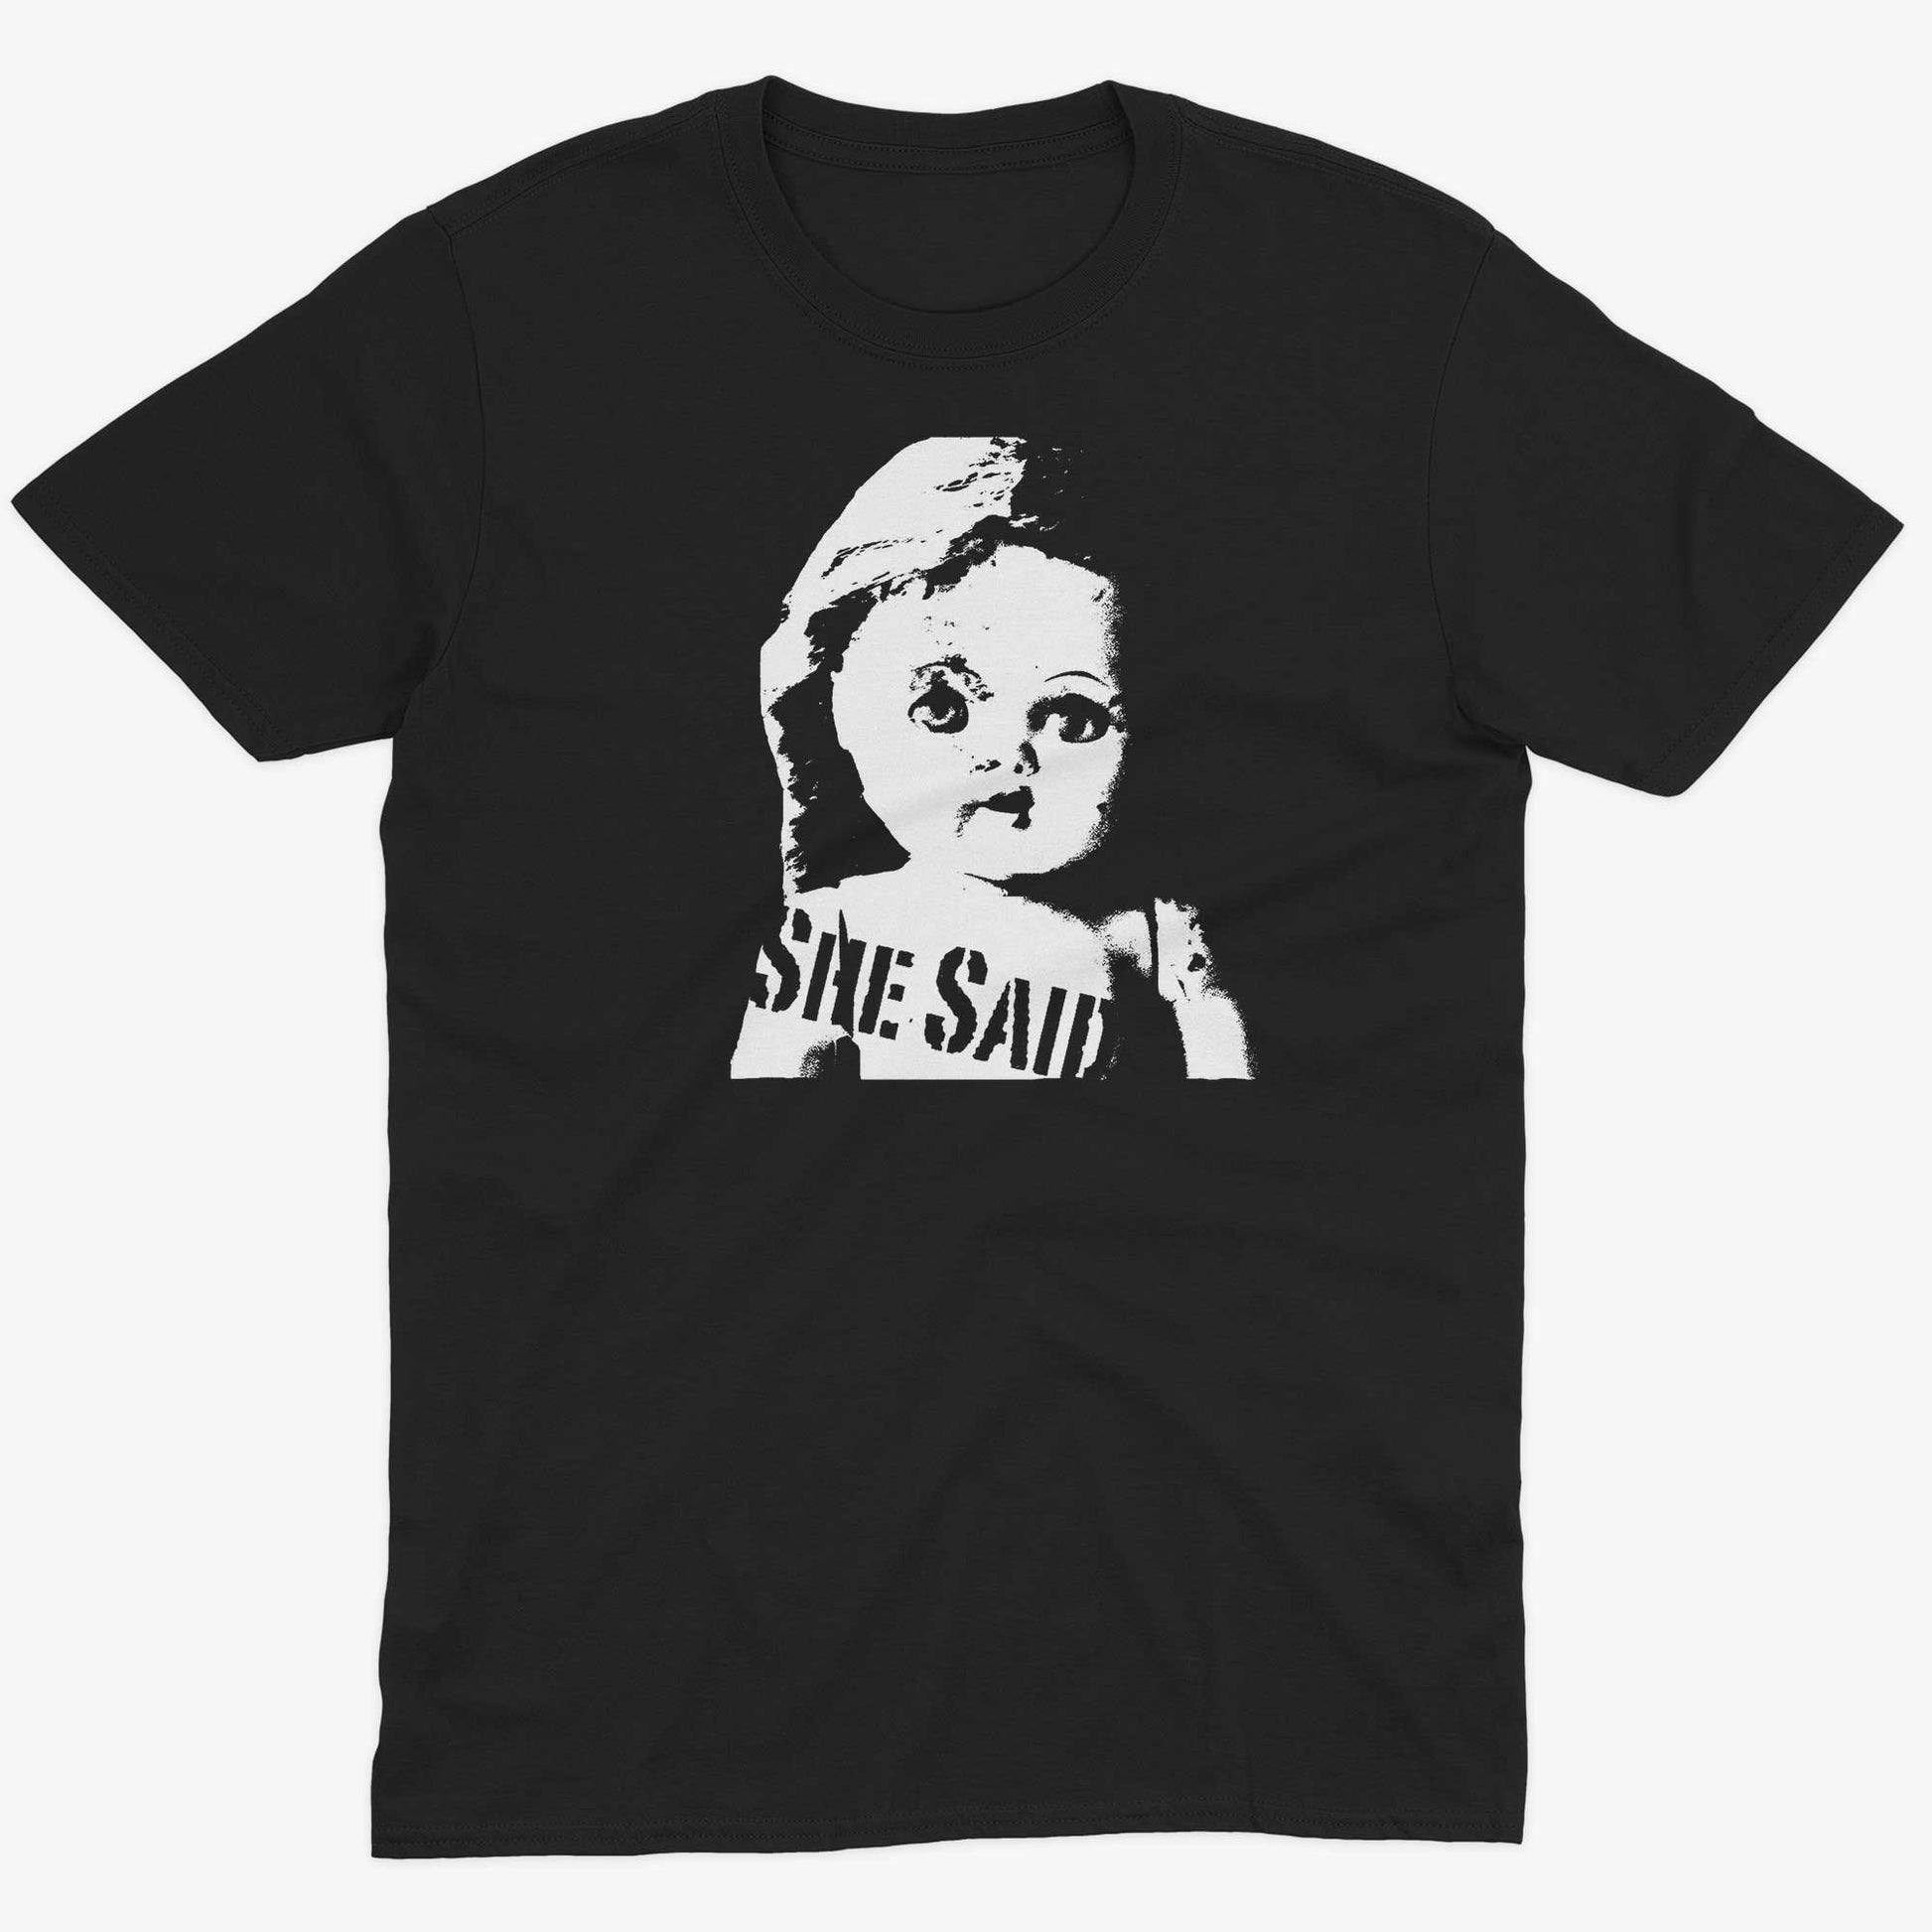 She Said Vintage Doll Head Unisex Or Women's Cotton T-shirt-Small-Unisex